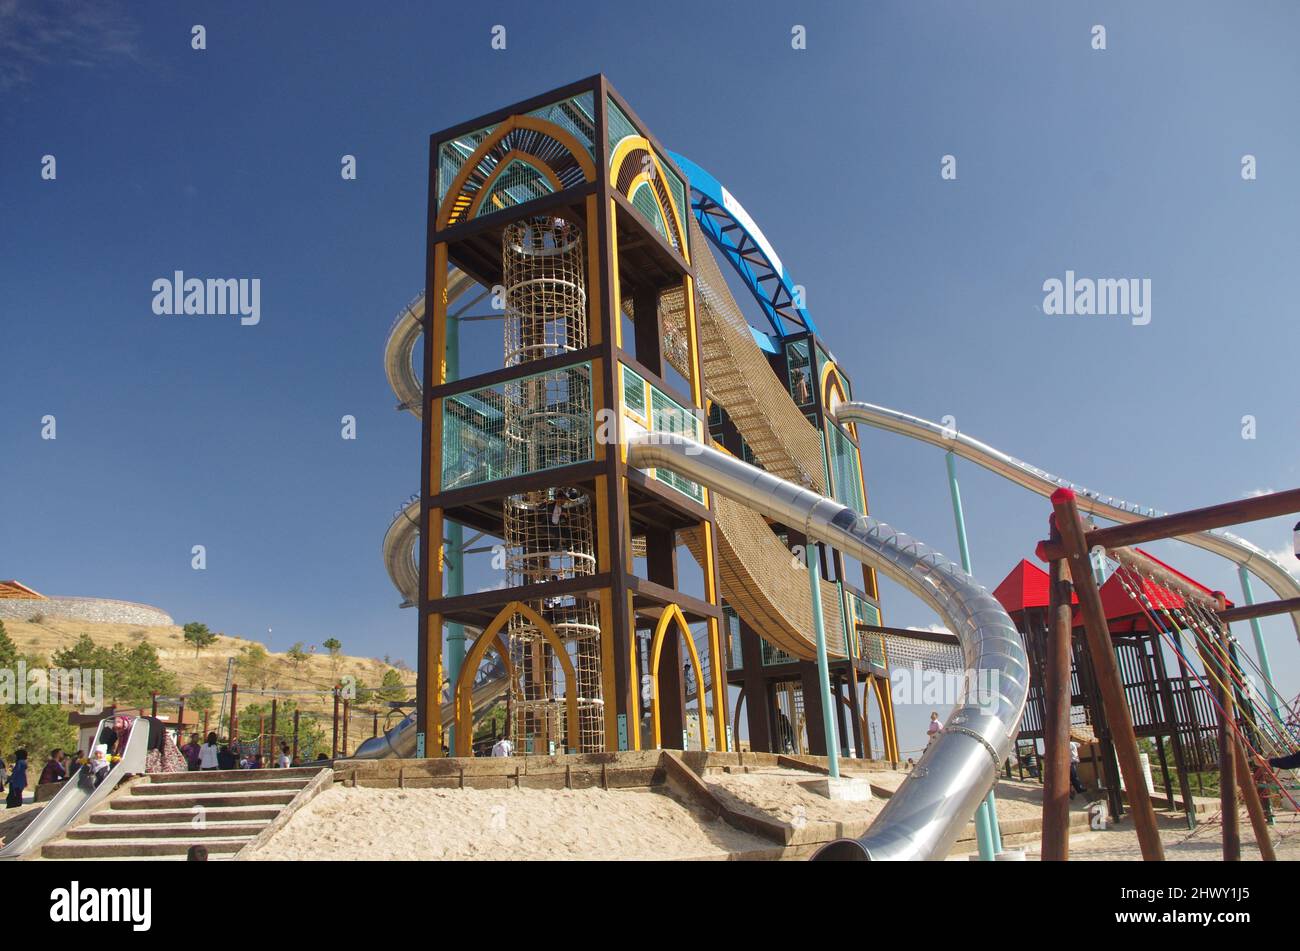 Sille Park is the one of most attractive place in Konya City. Huge playground for children. Colourful playground with slides and swings. Stock Photo